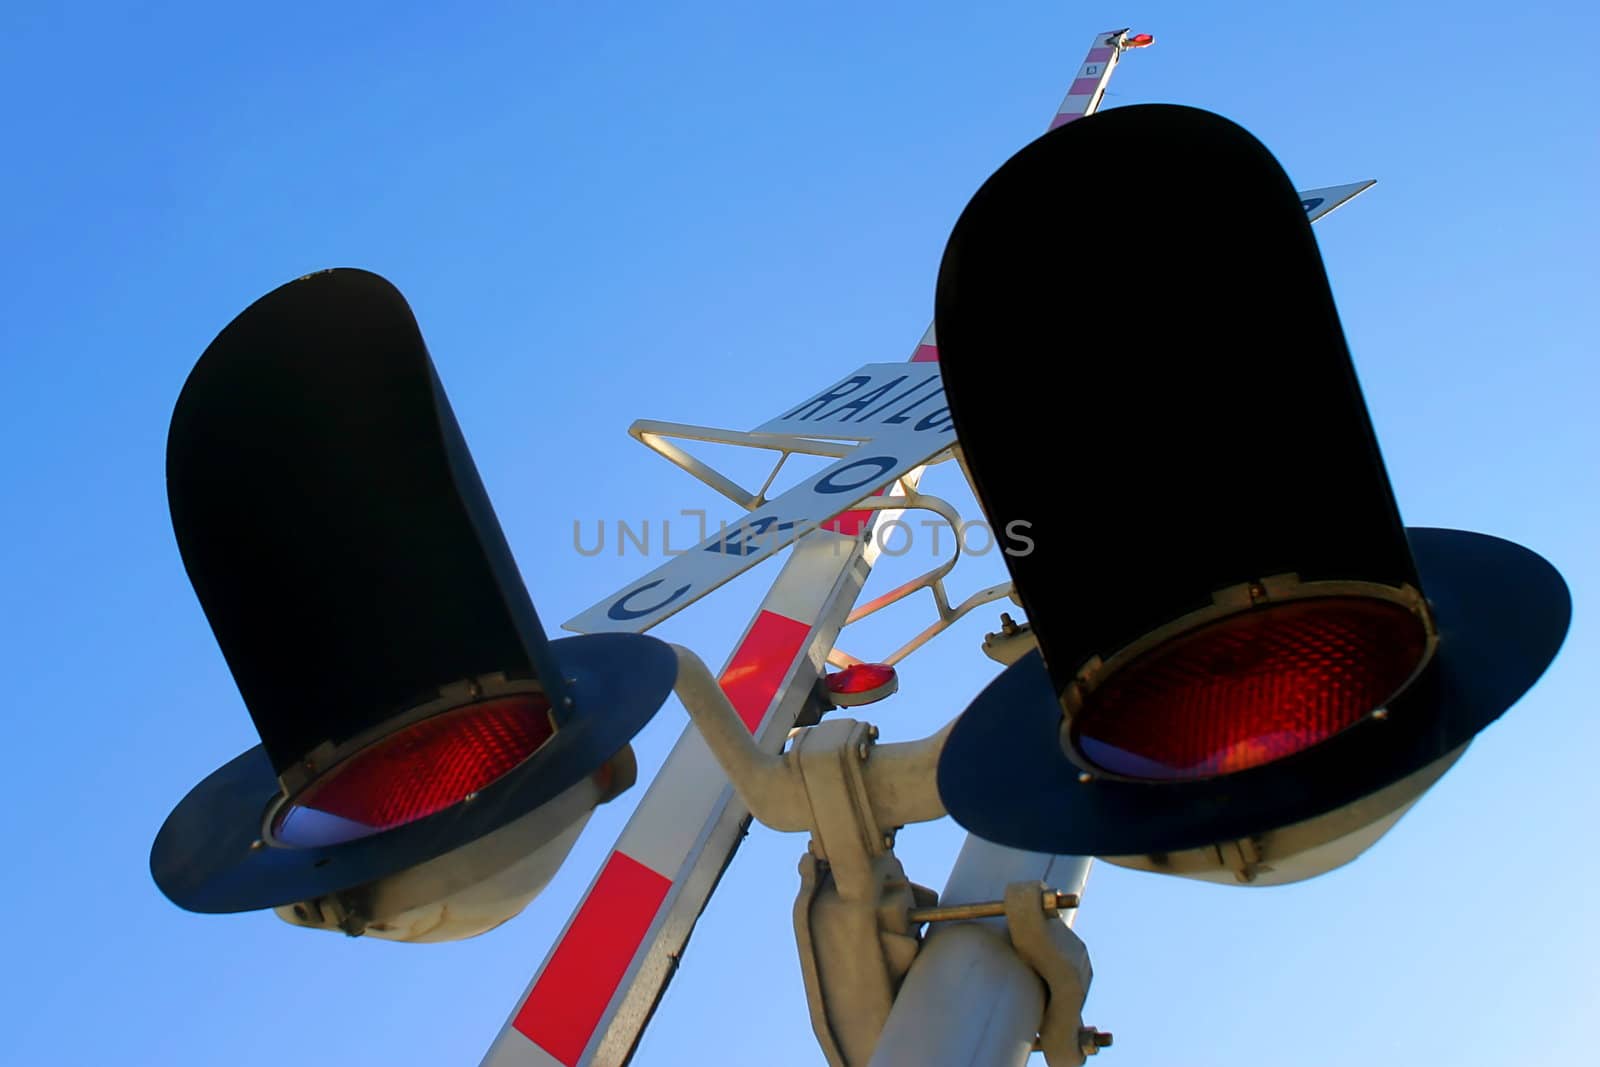 Railroad Crossing signal from below with sky in the background